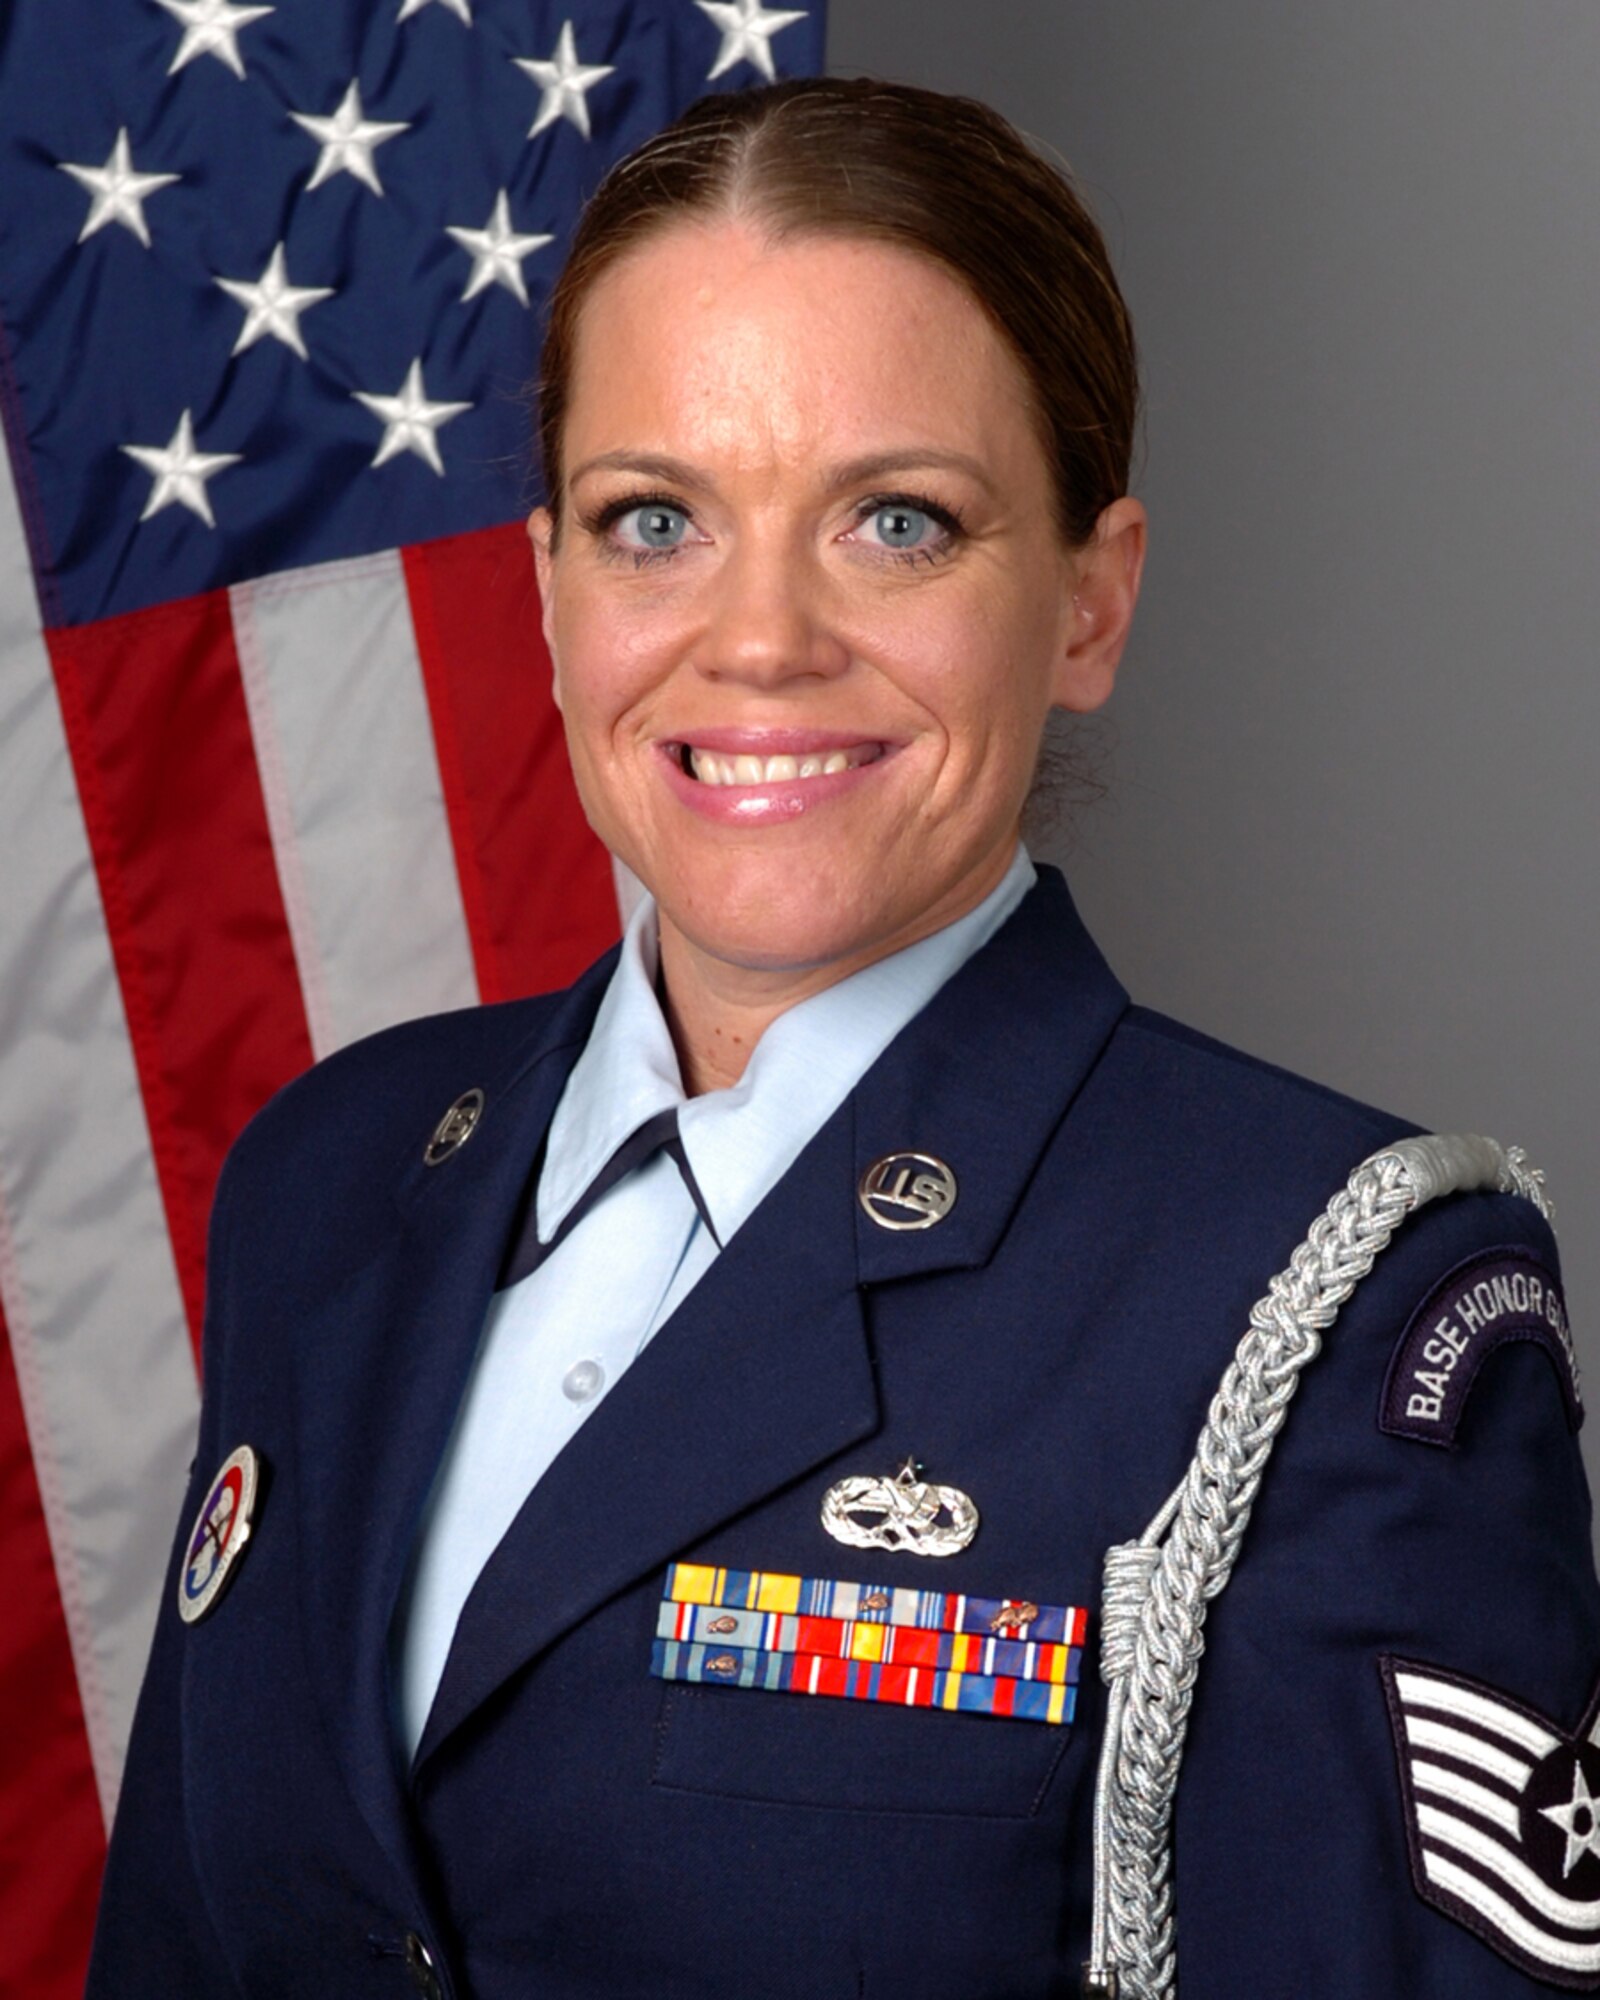 OFFUTT AIR FORCE BASE, Neb. -- Tech. Sgt. Stacey R. Hines, from Seymour Johnson AFB, N.C., is one of 29 Airmen nominated for awards who will attend the 2010 Air Combat Command Outstanding Airmen of the Year Awards Banquet in Omaha, Neb., April 21. Sergeant Hines is nominated for the Outstanding Honor Guard Program Manager of the Year Award. U.S. Air Force courtesy photo